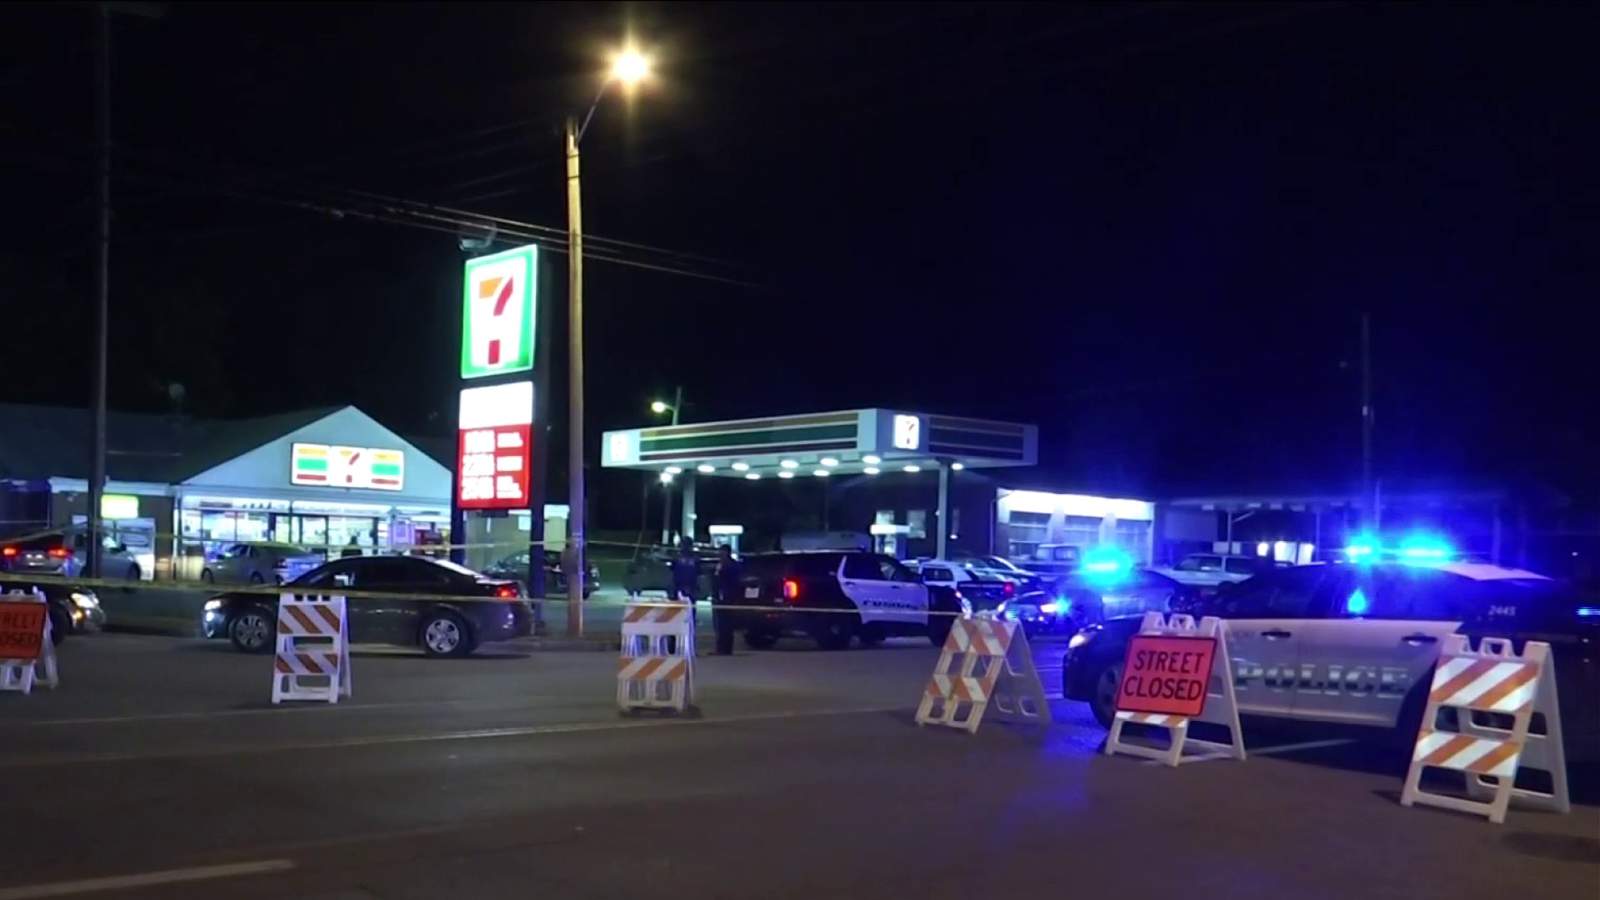 Police identify person who died in shooting at 7-Eleven in NW Roanoke